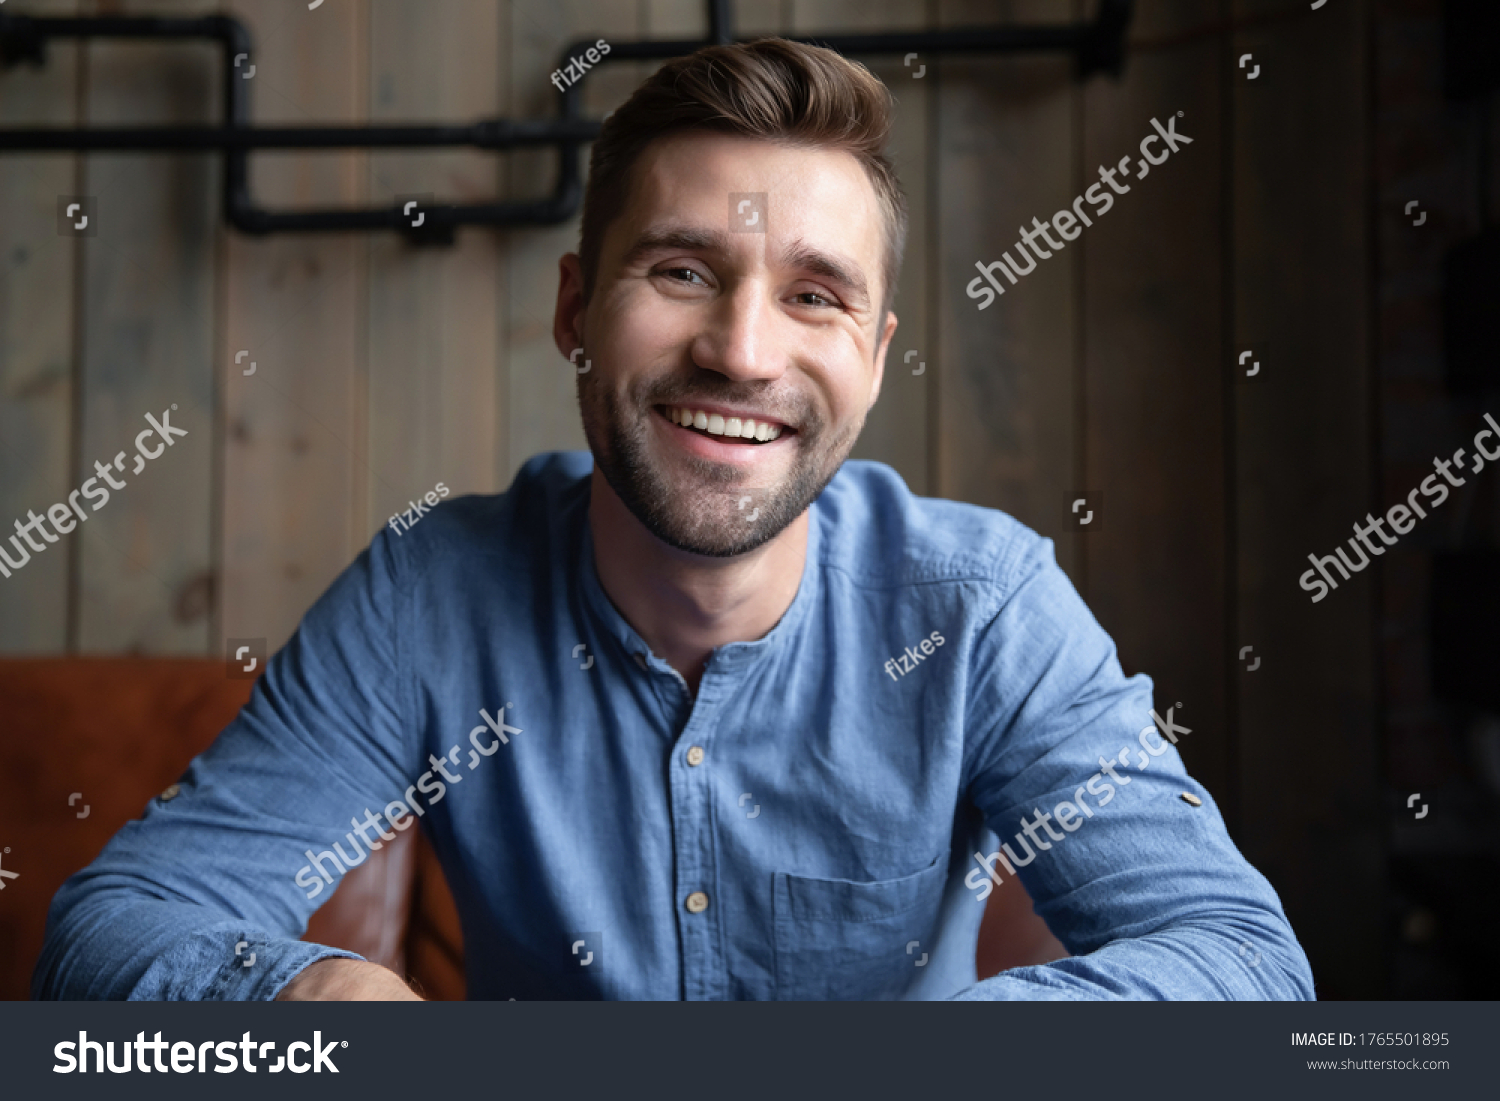 Head shot portrait smiling Caucasian man sitting indoors having pleasant web cam videoconference on-line chat by work or informal speak use pc. Job interview, tutoring video call, modern tech concept #1765501895